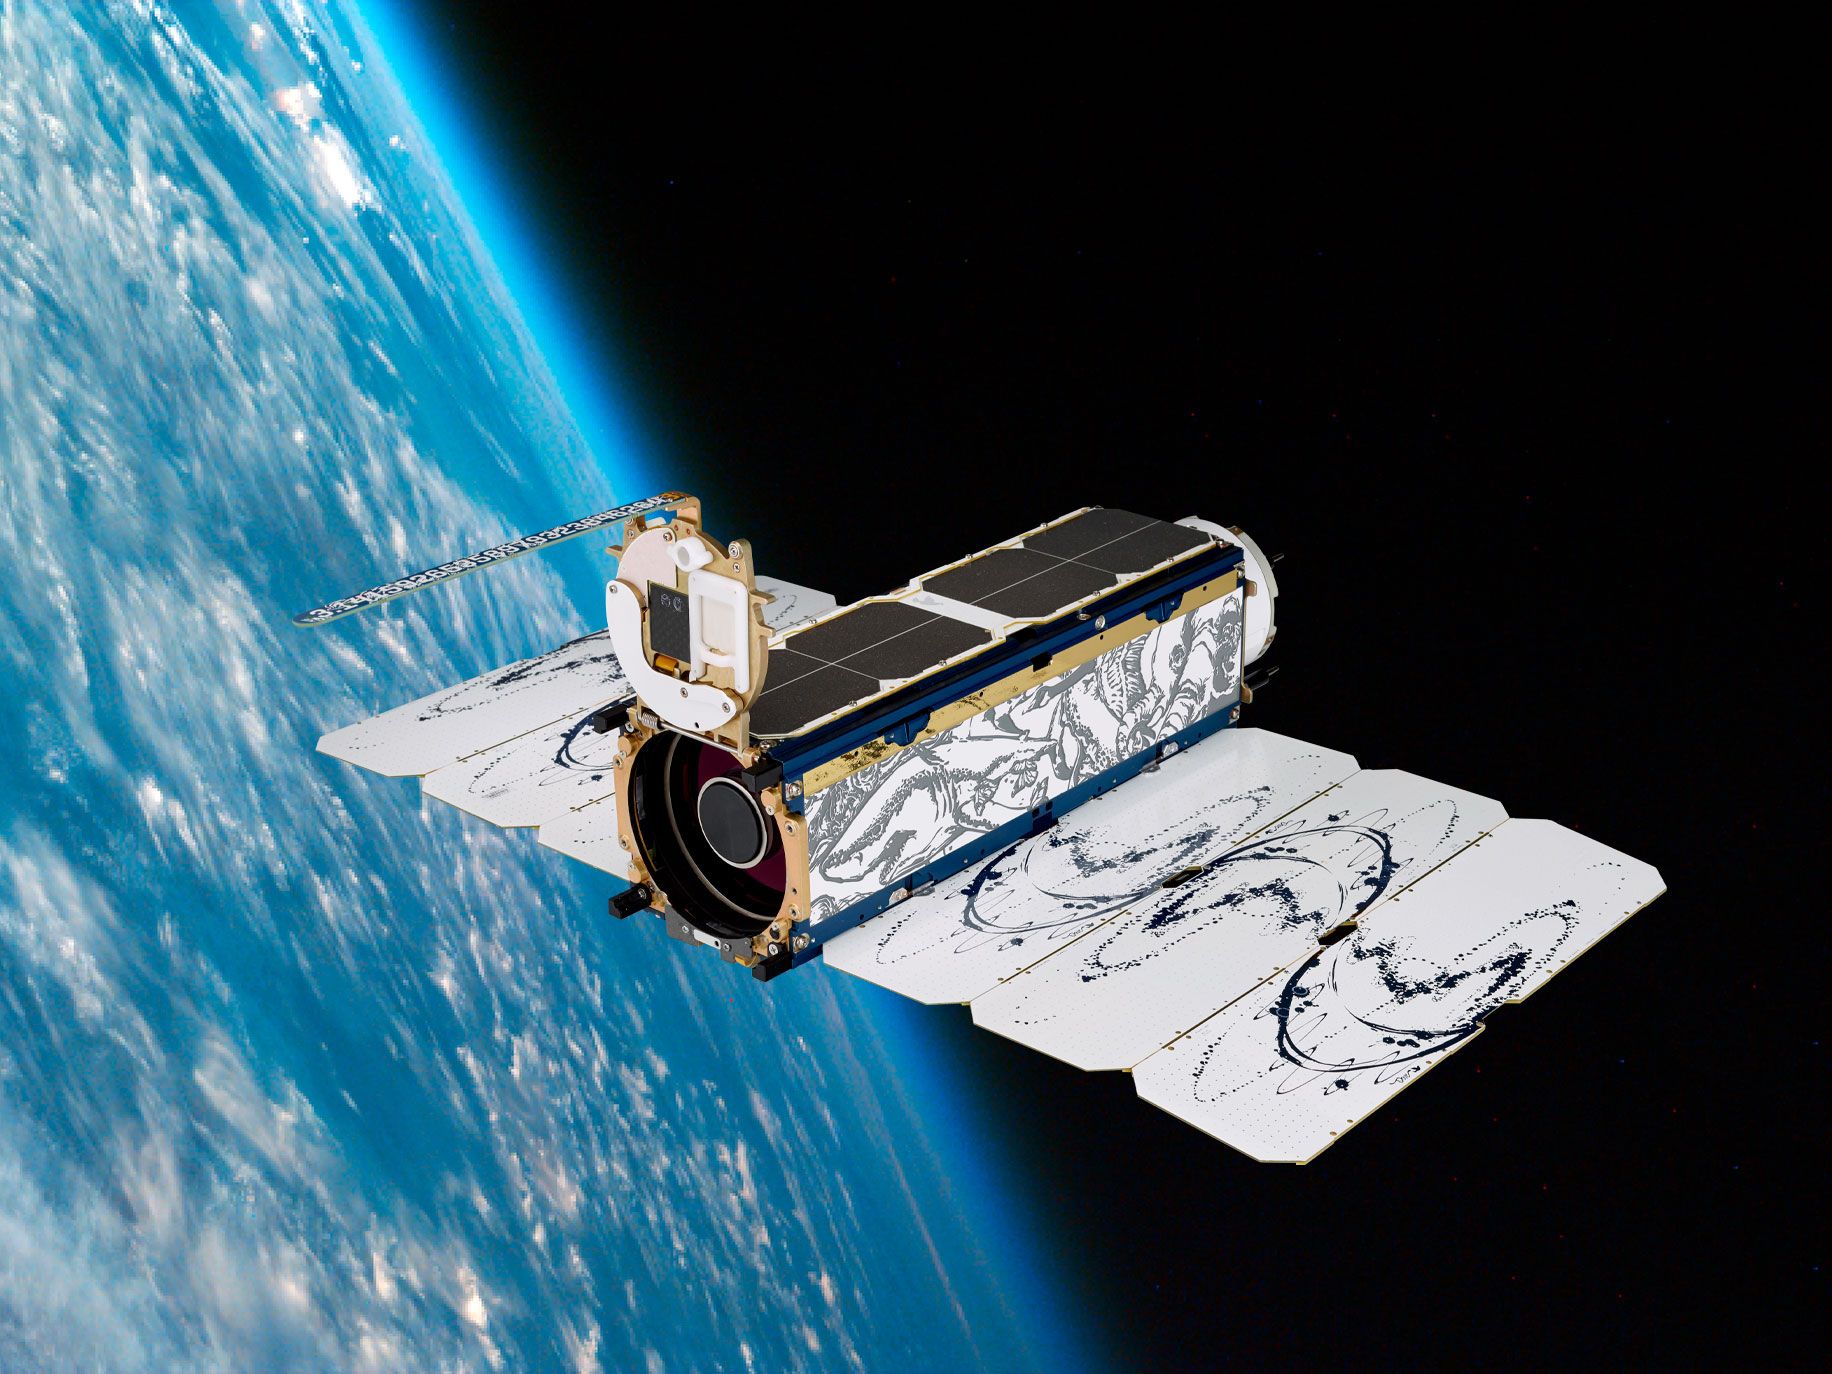 Planet Labs 48 Earth-Imaging satellites will hitch a ride aboard SpaceX's Transporter-1 Mission